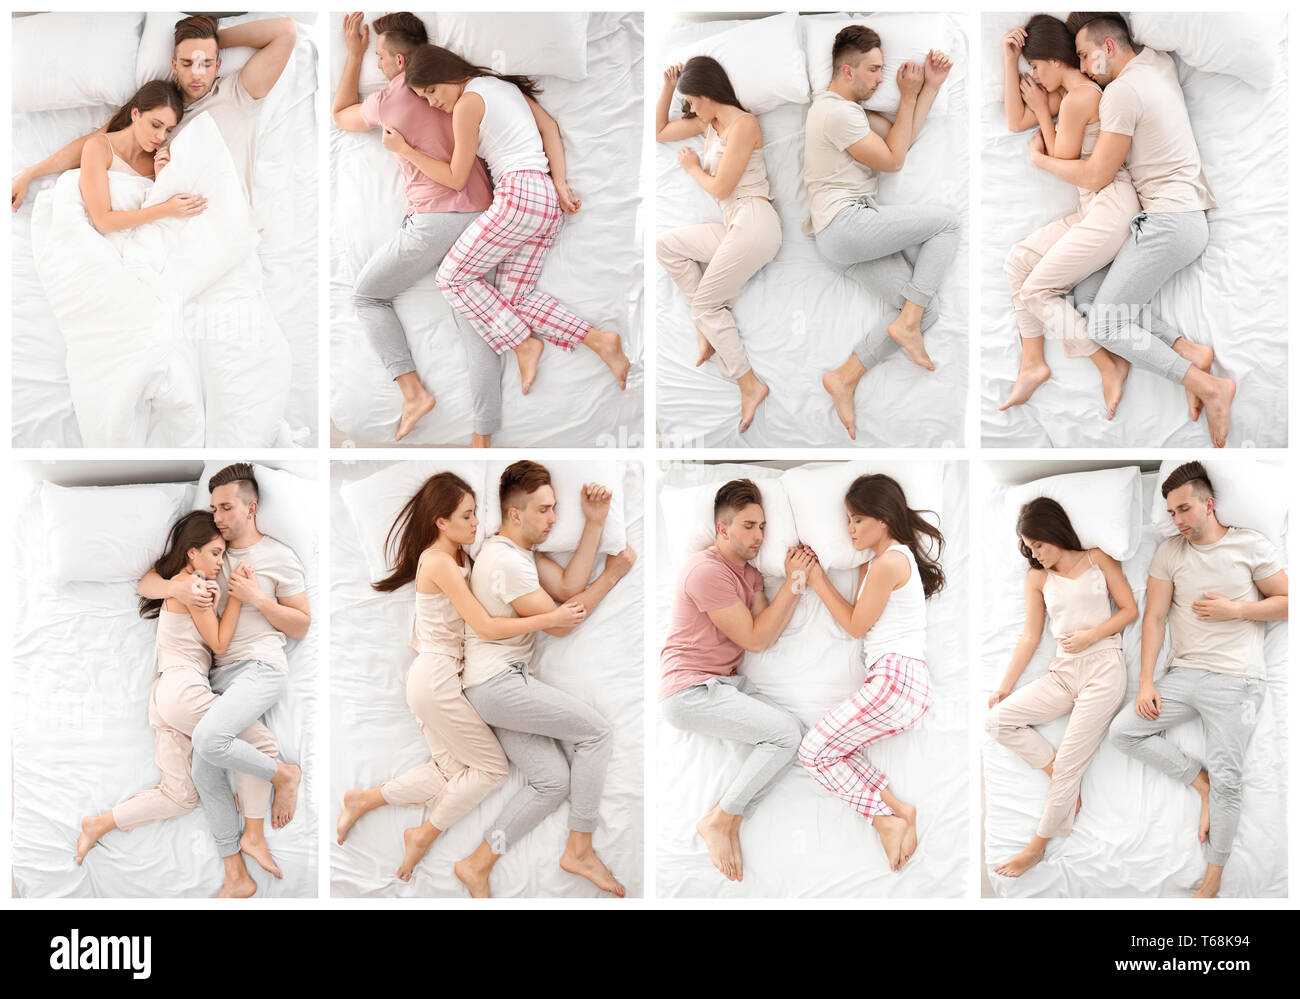 What your sleeping posture say about your relationship? Couple Sleeping  Position analyzed #myfriendalexa - My Words My Wisdom